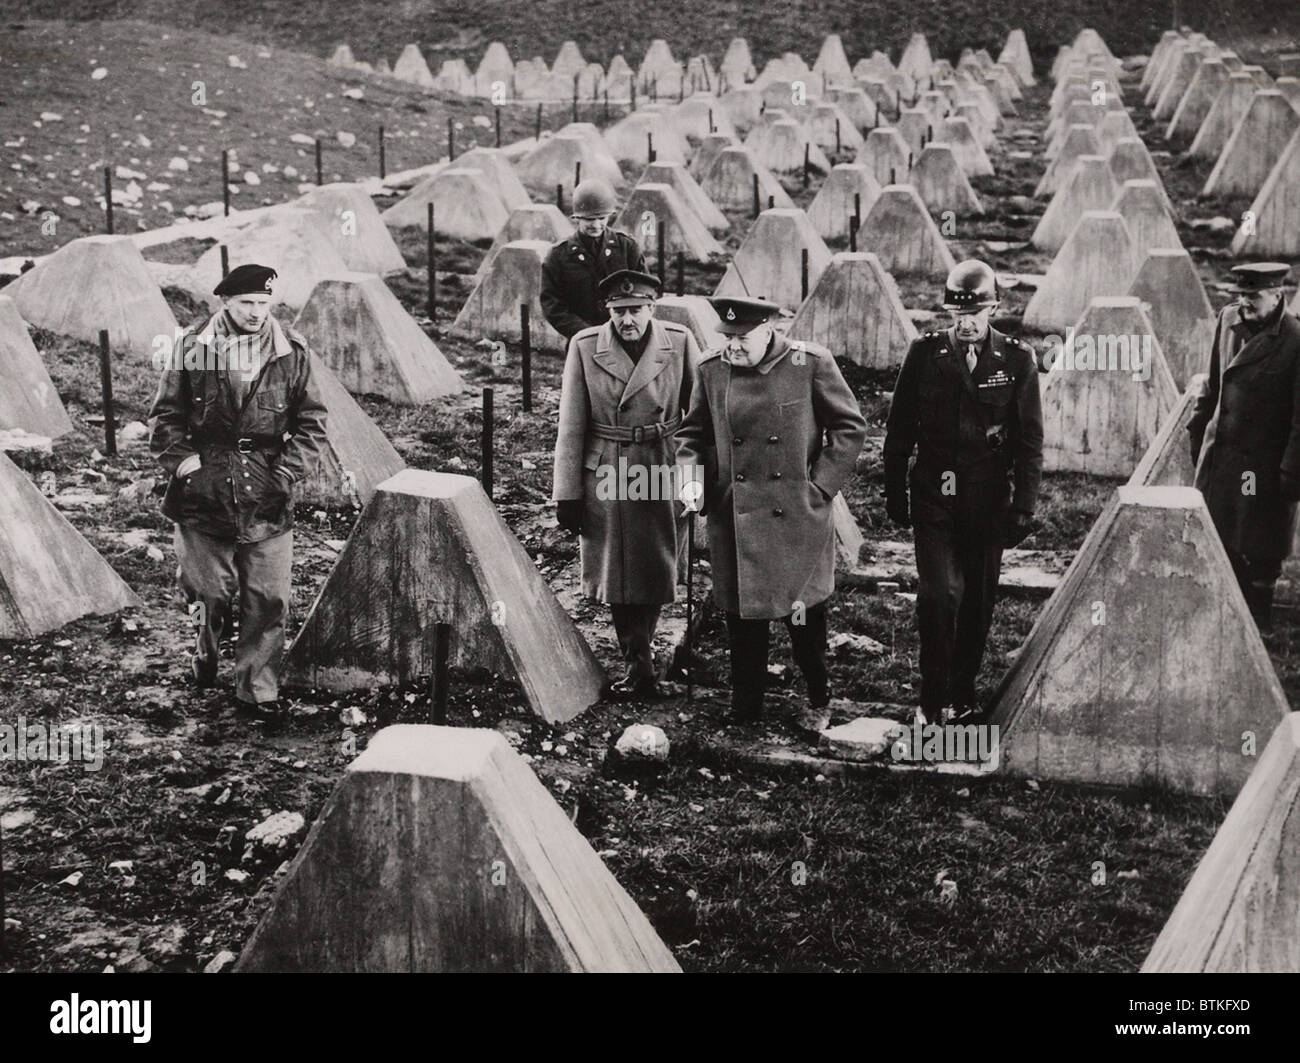 Winston Churchill walks among the dragons teeth (tank traps) of the fallen Siegfried Line. With him are British Field Marshal Montgomery, British Field Marshal Sir Alan Brooke, and U.S. General William H. Simpson. March 1944. Stock Photo